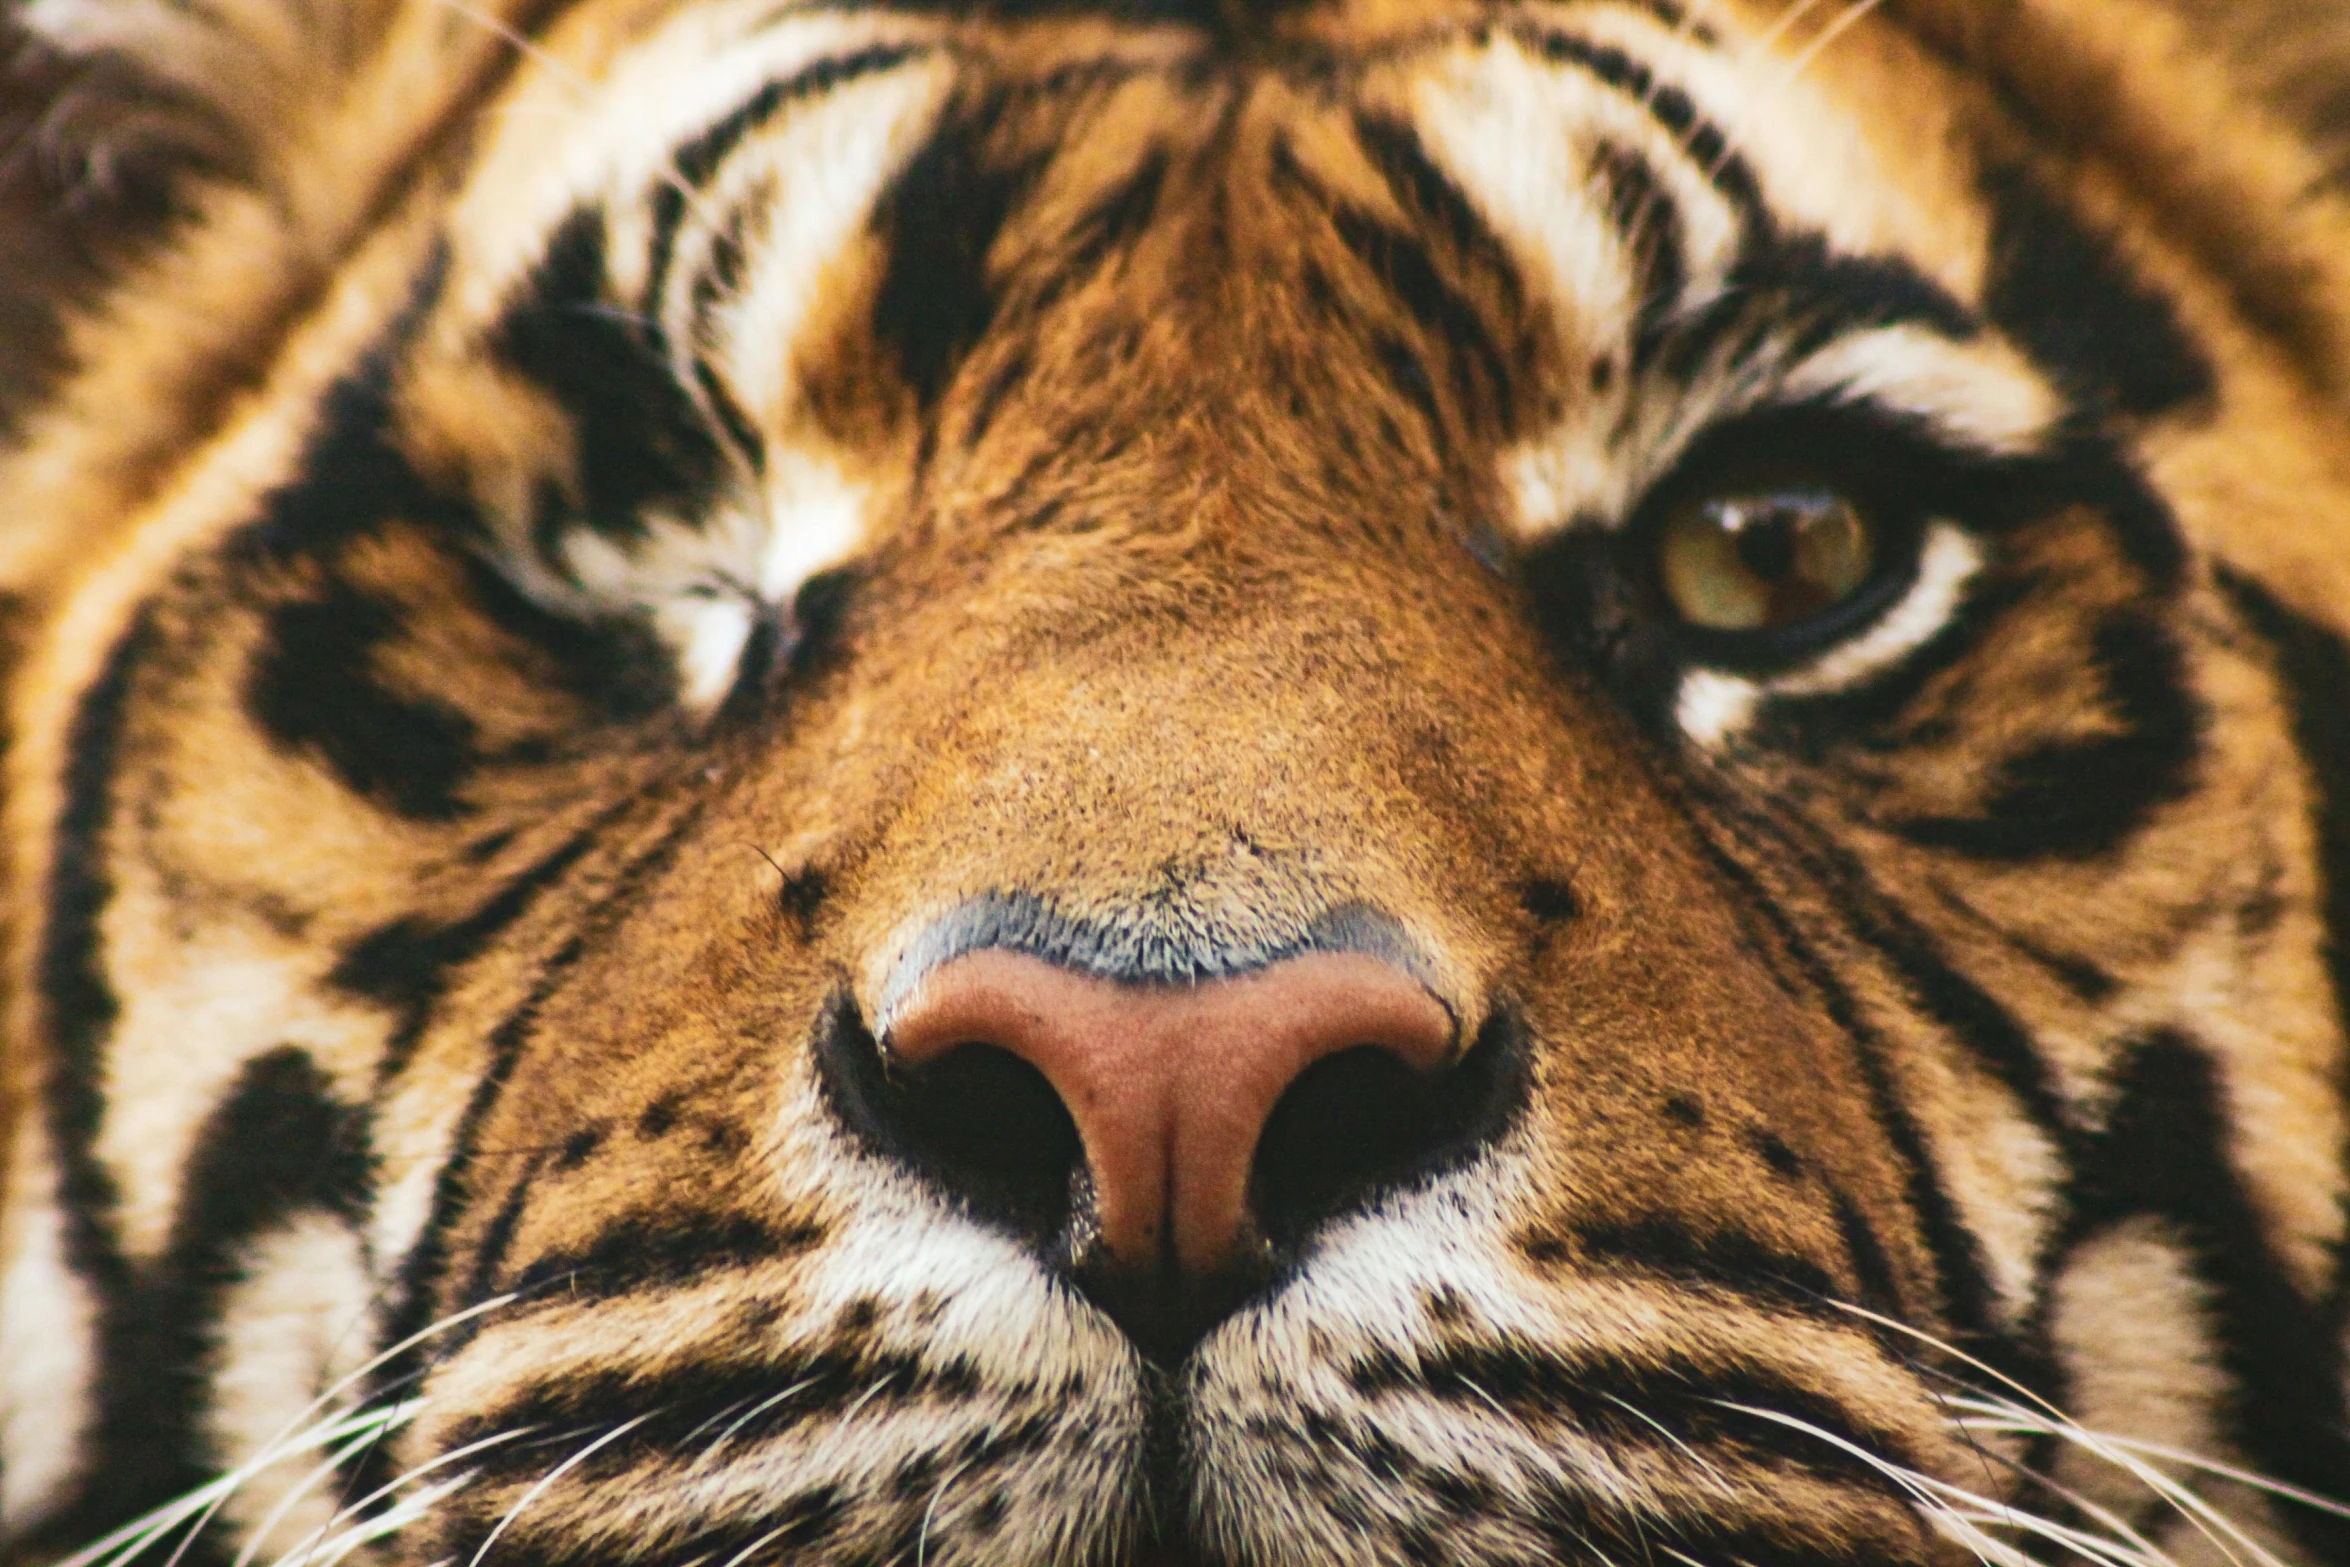 the close up s of a tiger's face